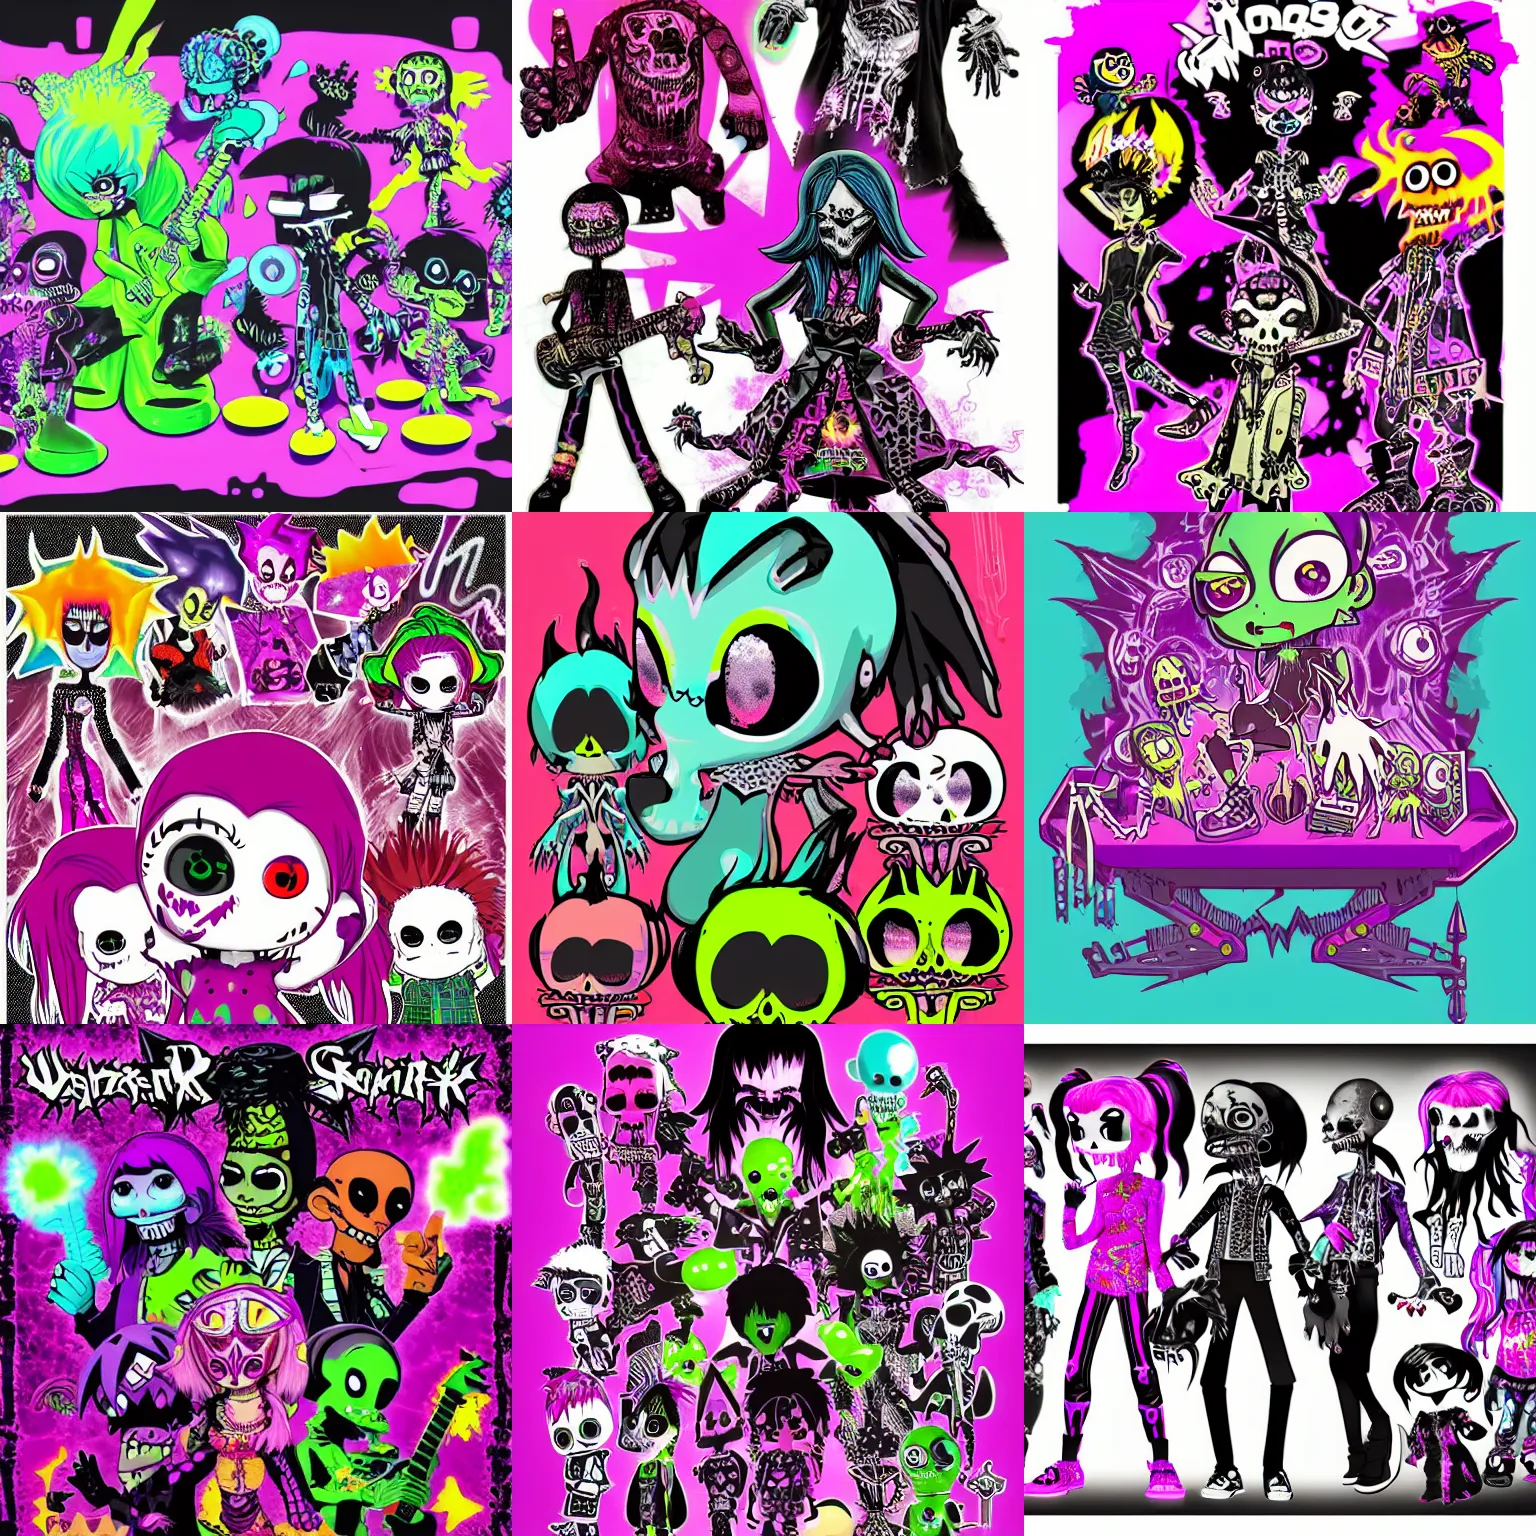 Prompt: CGI lisa frank gothic punk glow in the dark bones vampiric rockstar vampire squid concept character designs of various shapes and sizes by genndy tartakovsky and the creators of fret nice at pieces interactive and splatoon by nintendo and little big planet by media molecule and psychonauts by doublefines tim shafer being overseen by Jamie Hewlett from gorillaz for a new hotel Transylvania movie